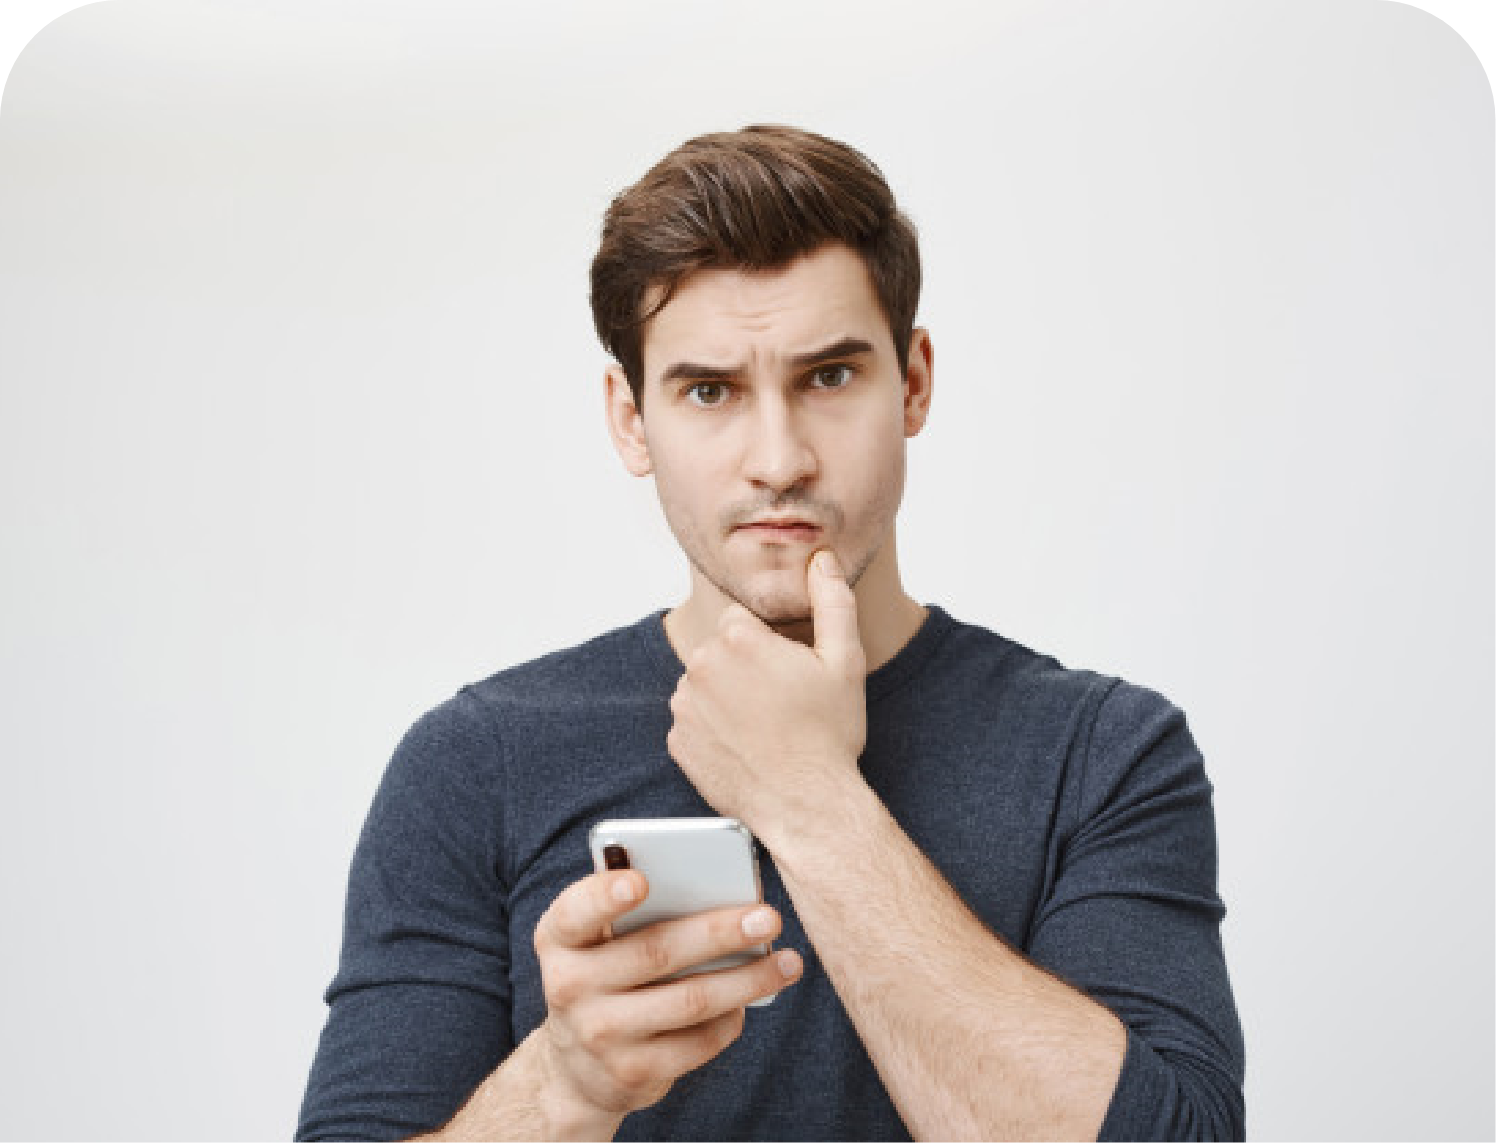 man with hand on his chin thinking while using a smart phone